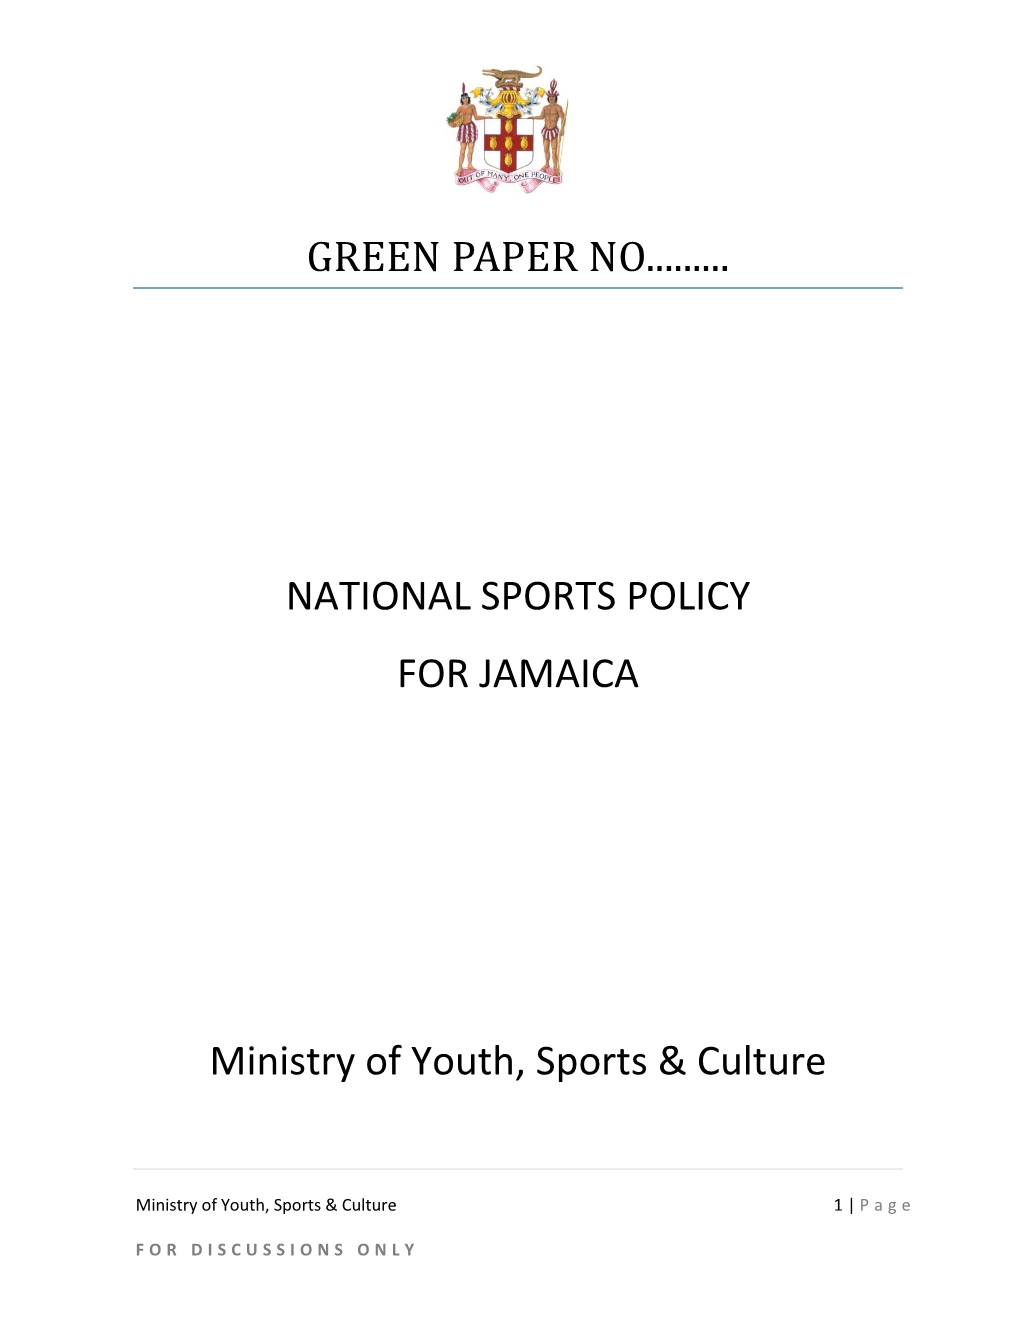 Green Paper No...National Sports Policy for Jamaica